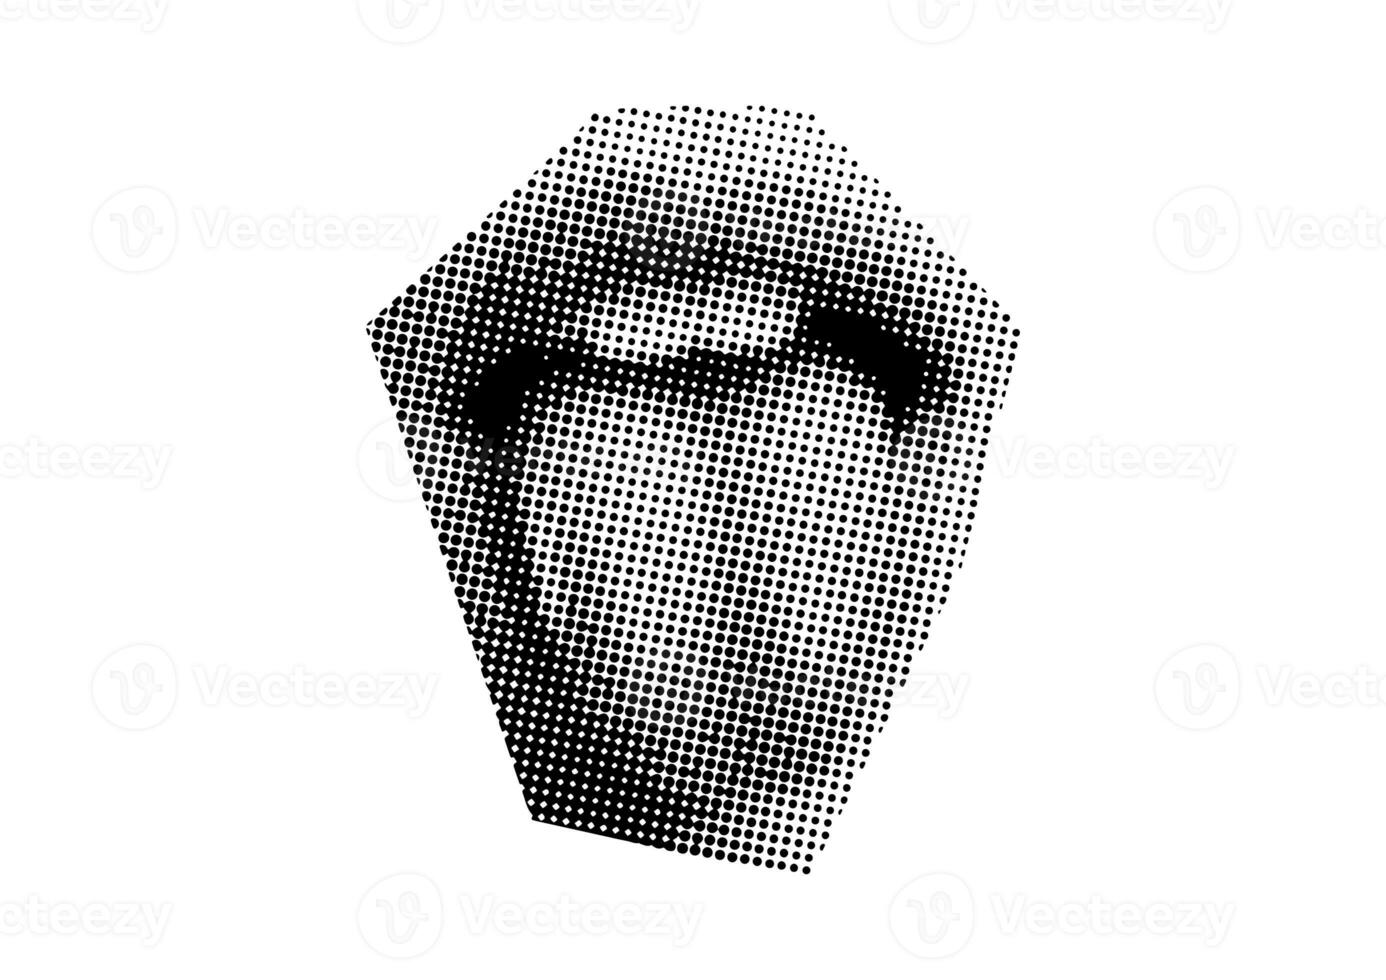 Mouth and lips, smile, tongue, dots Punk y2k black and white collage elements photo